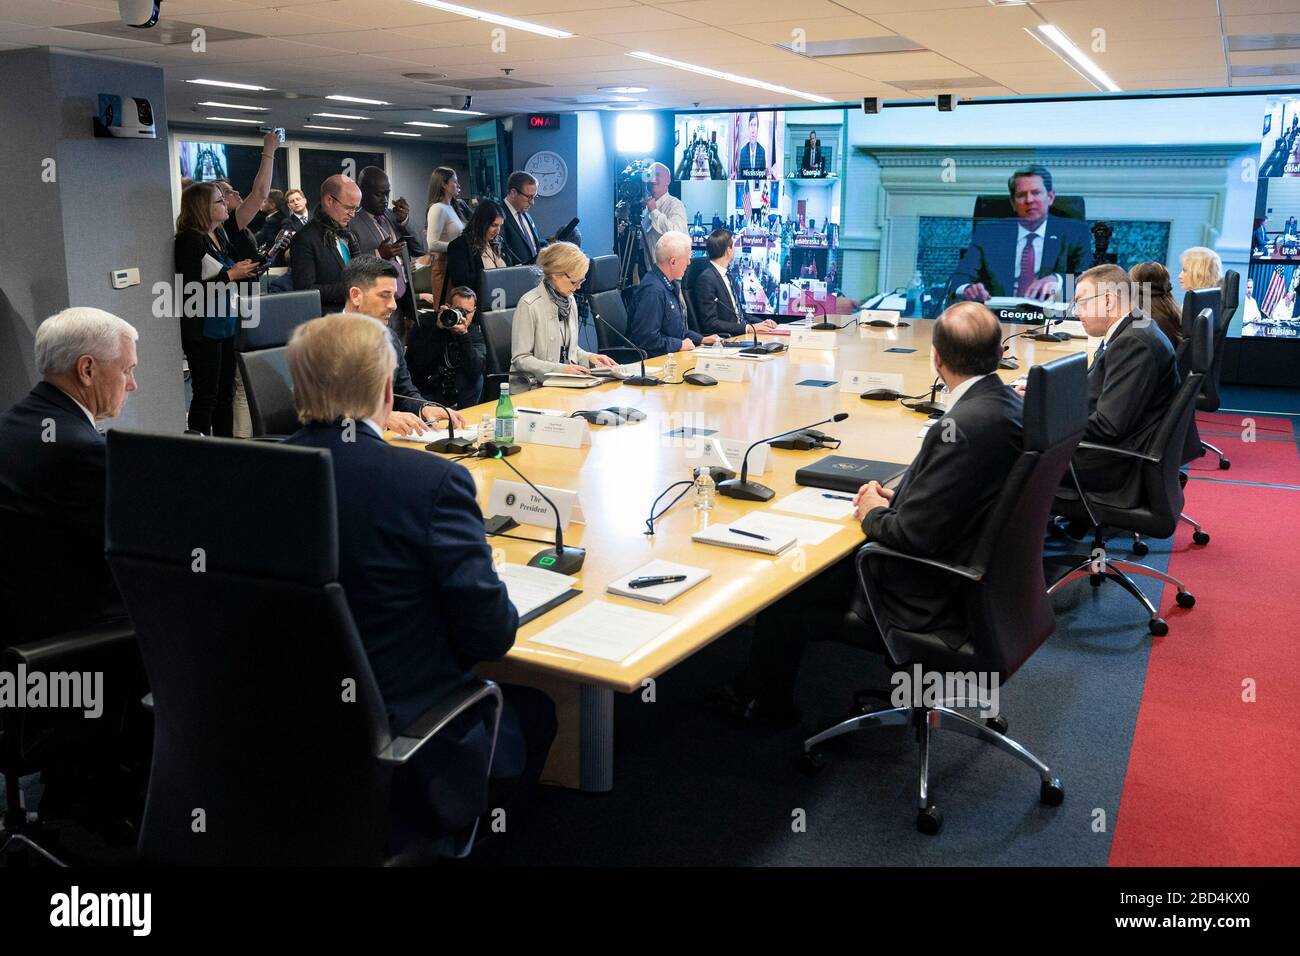 President Donald J. Trump, joined by Vice President Mike Pence and members of the White House Coronavirus Task Force, participates in a teleconference with Governors at the Federal Emergency Management Center Headquarters in Washington, D.C. Thursday, March 19, 2020, to discuss partnership to prepare, mitigate and respond to the COVID-19 Coronavirus. Stock Photo